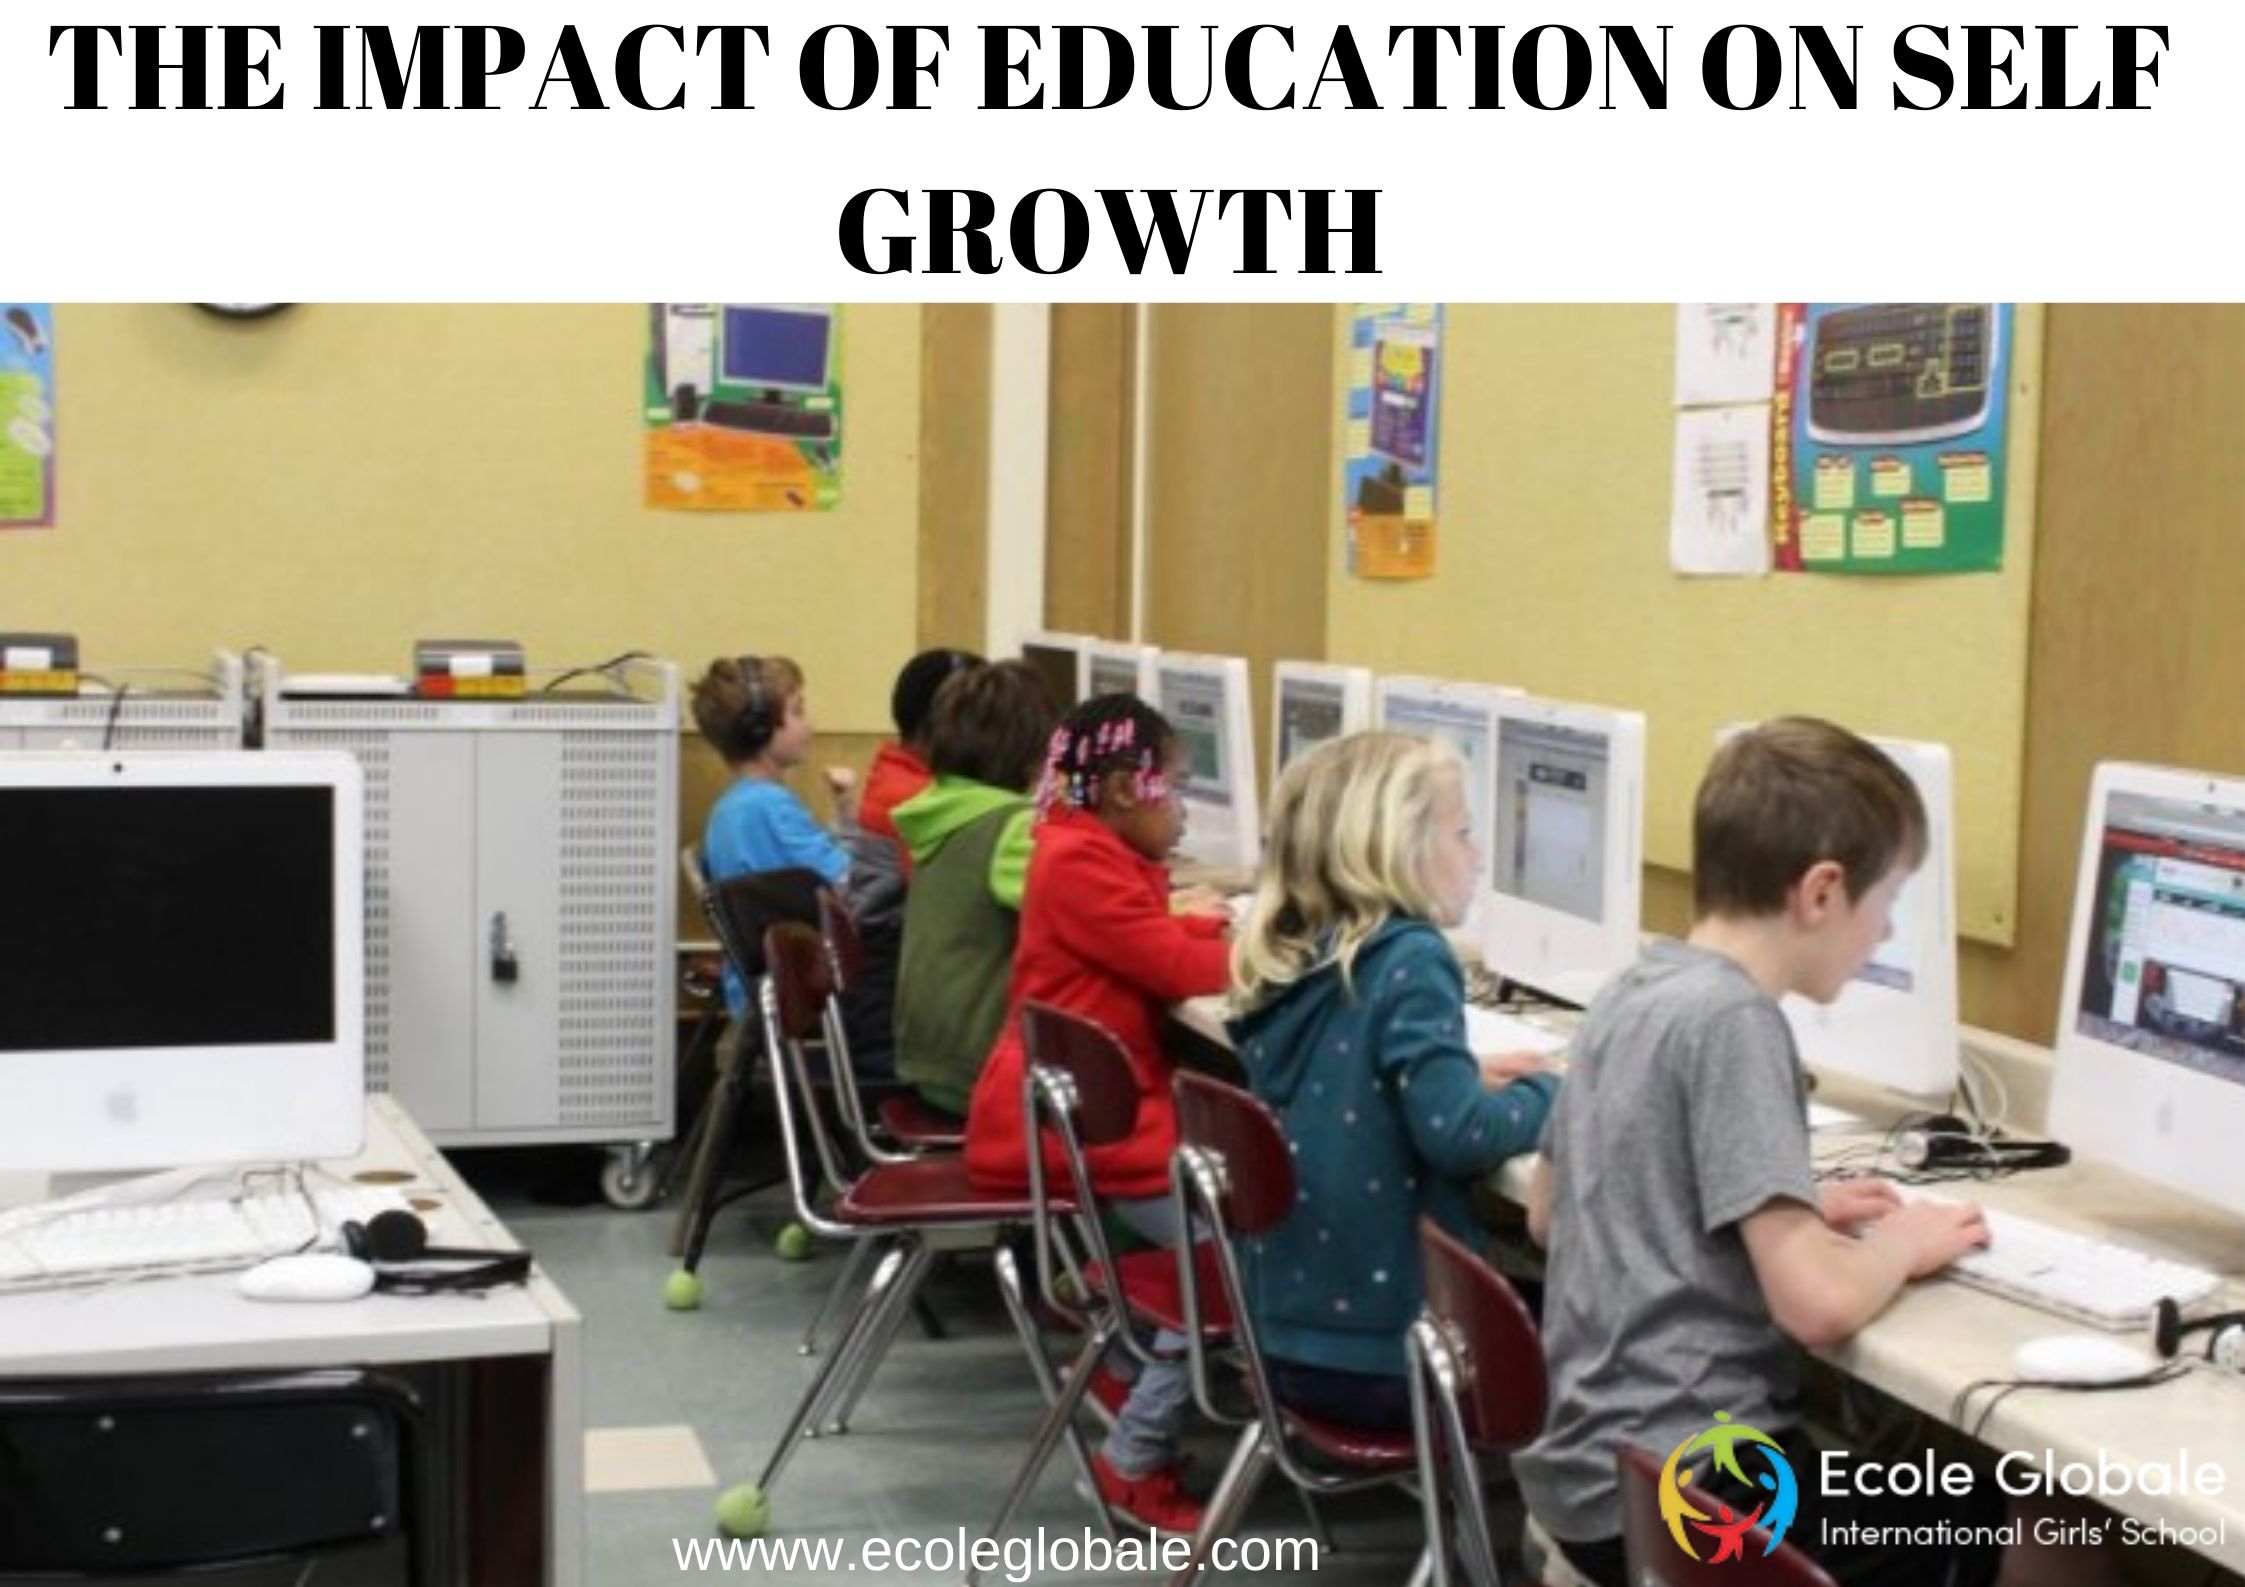 THE IMPACT OF EDUCATION ON SELF GROWTH